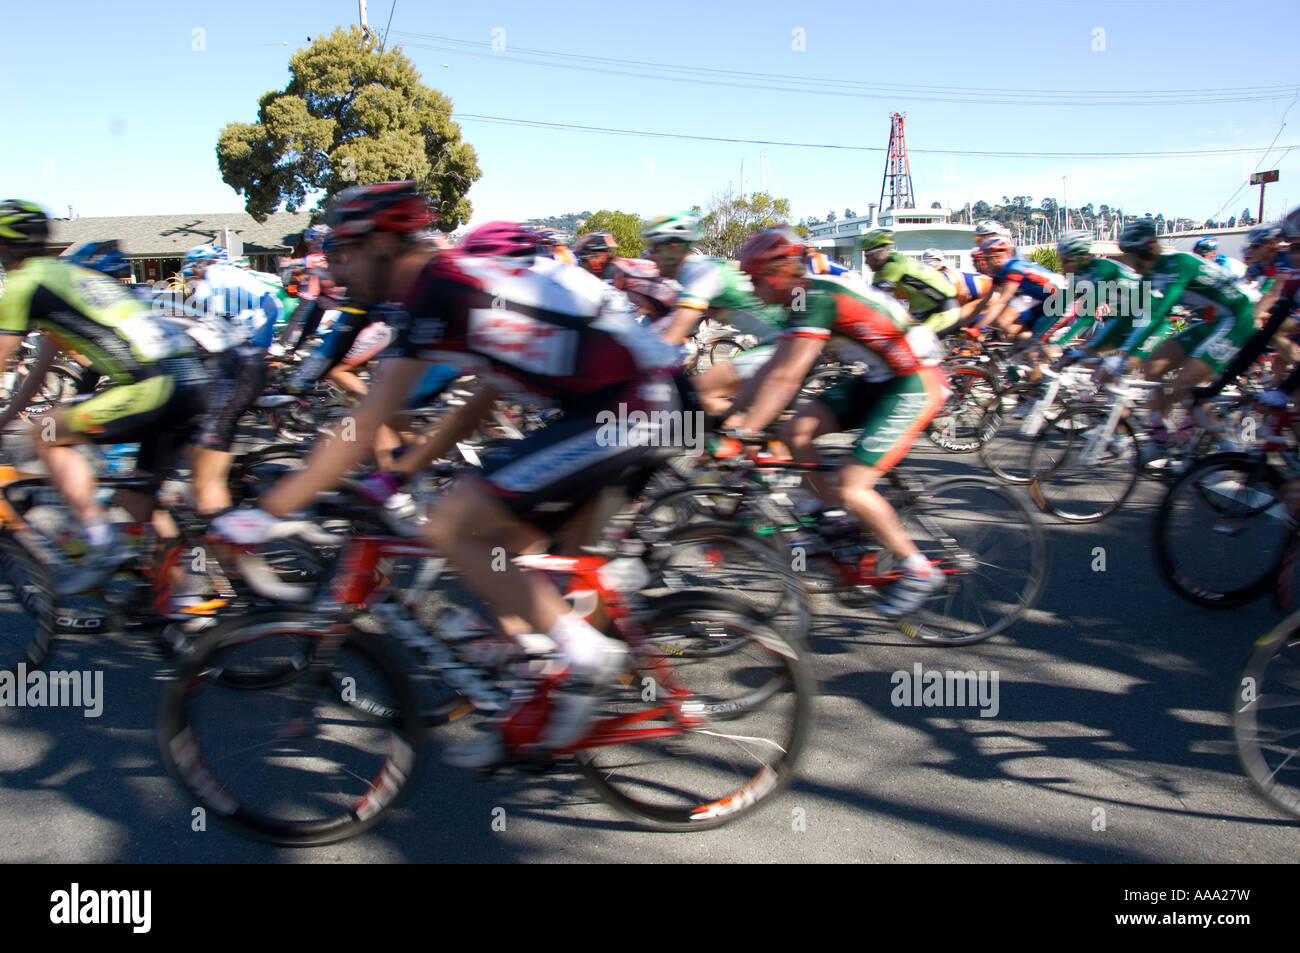 Bicycle racers in a blur racing the streets of Sausalito, California Stock Photo